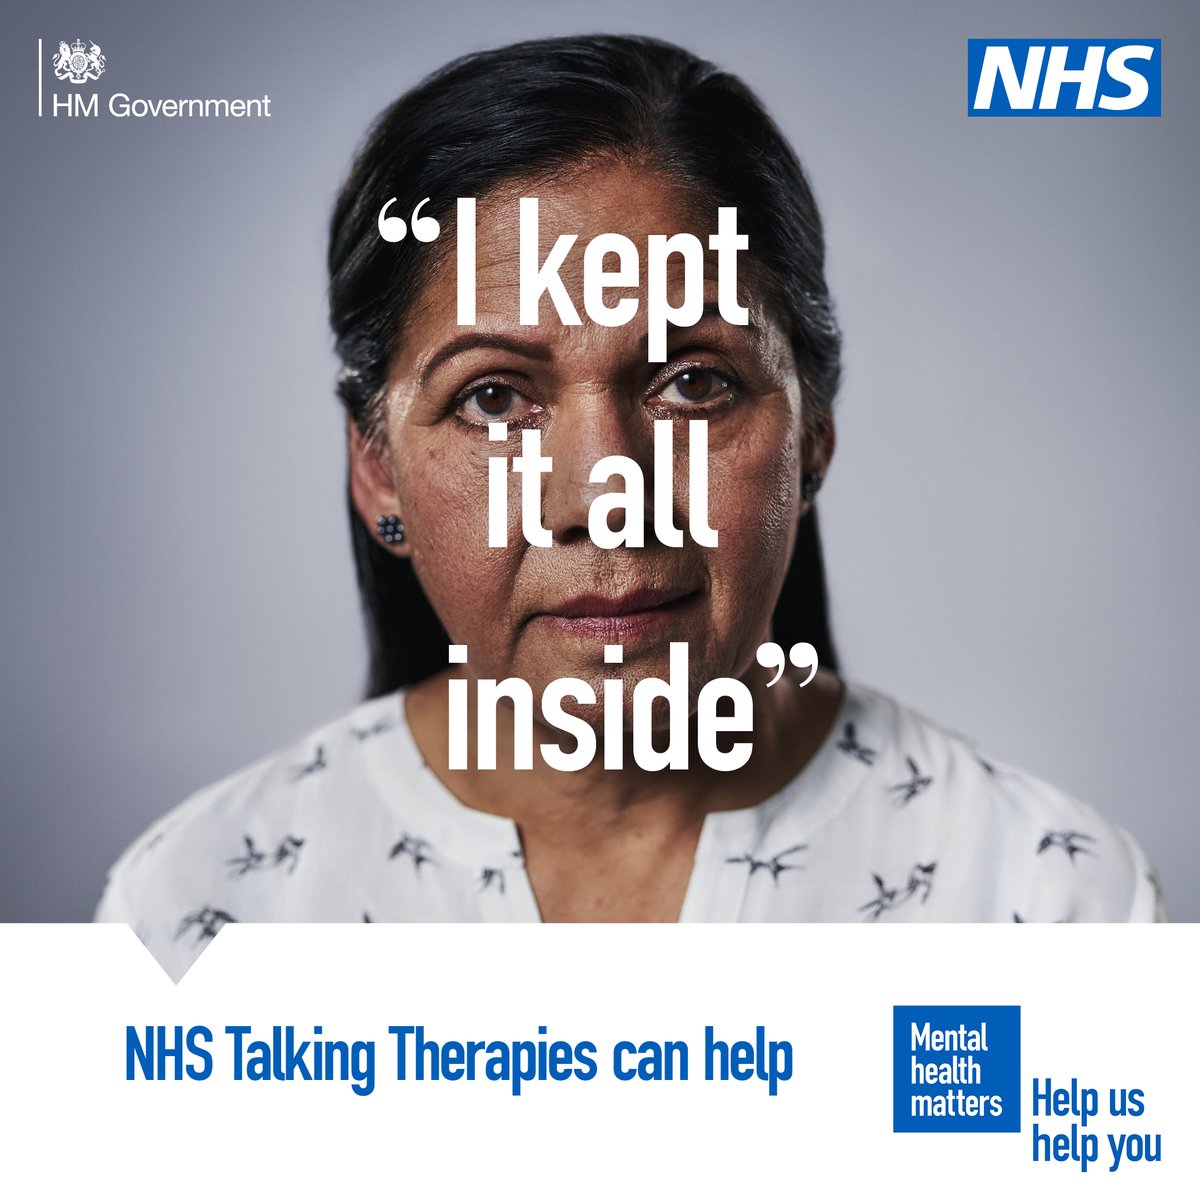 Struggling with feelings of depression, excessive worry, social anxiety, post-traumatic stress or obsessions and compulsions? NHS Talking Therapies can help. The service is effective, confidential and free💙 Your GP can refer you or refer yourself at orlo.uk/Ux28e